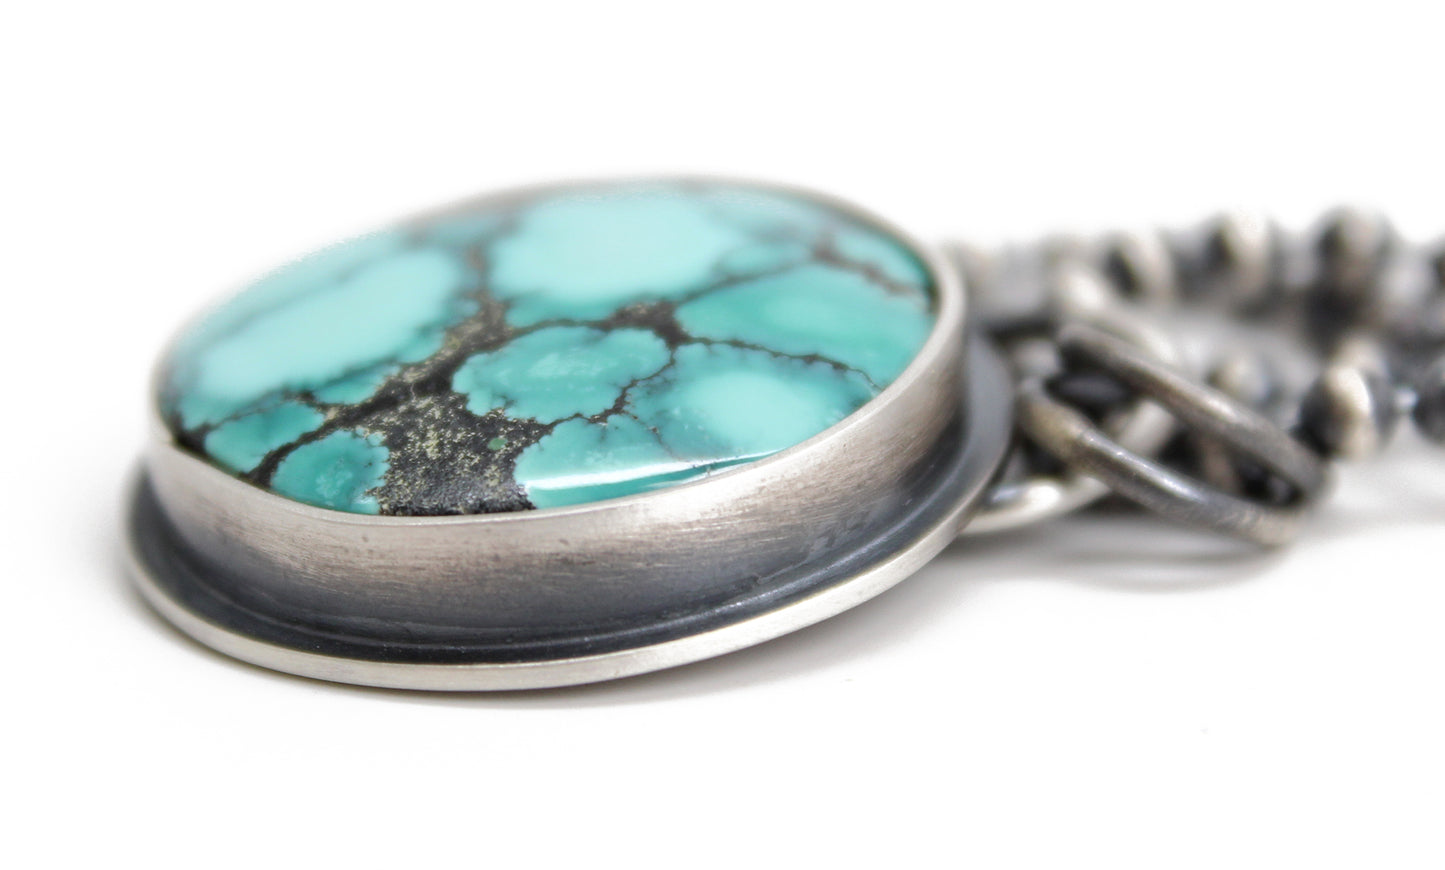 Yungai Turquoise Pendant in Sterling Silver